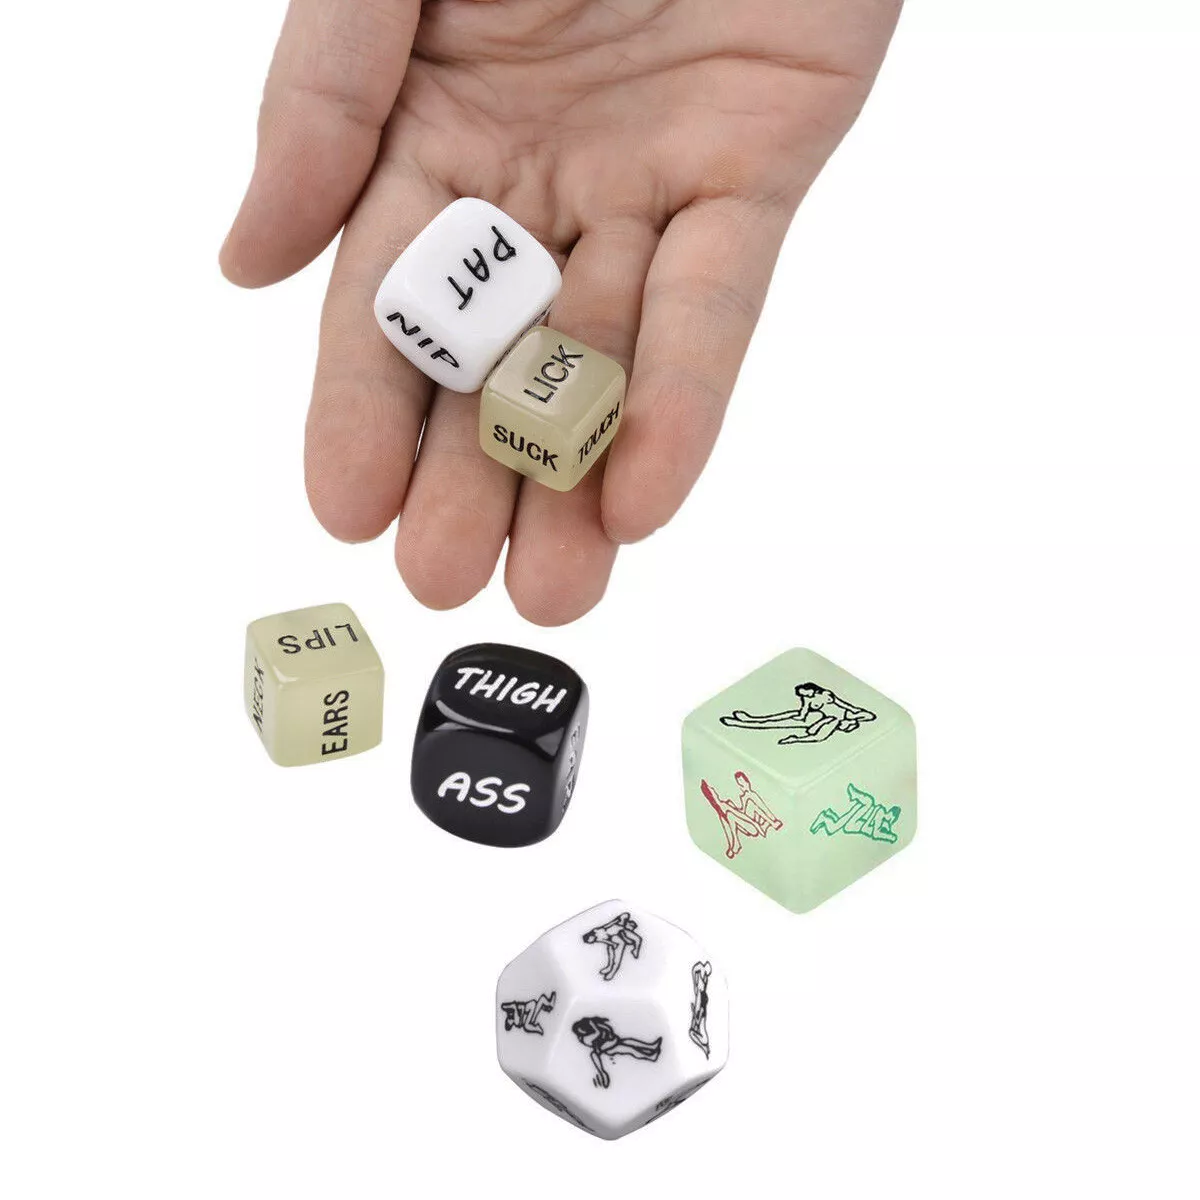 billy caruthers add playing with sex dice photo